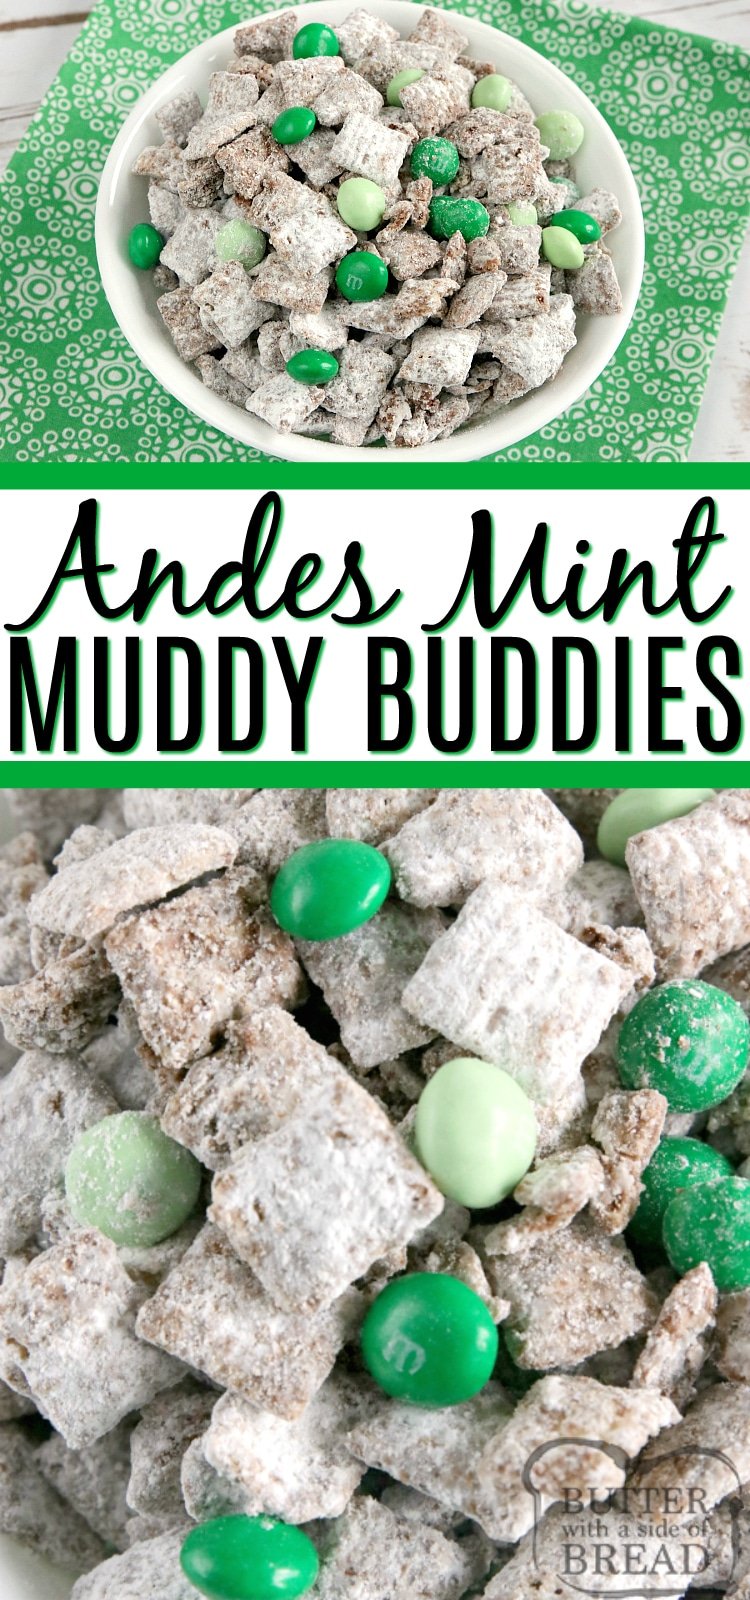 Mint Muddy Buddies are made in just a few minutes with only 5 ingredients! The chocolate mint coating is made by melting Andes mints - so easy and delicious!